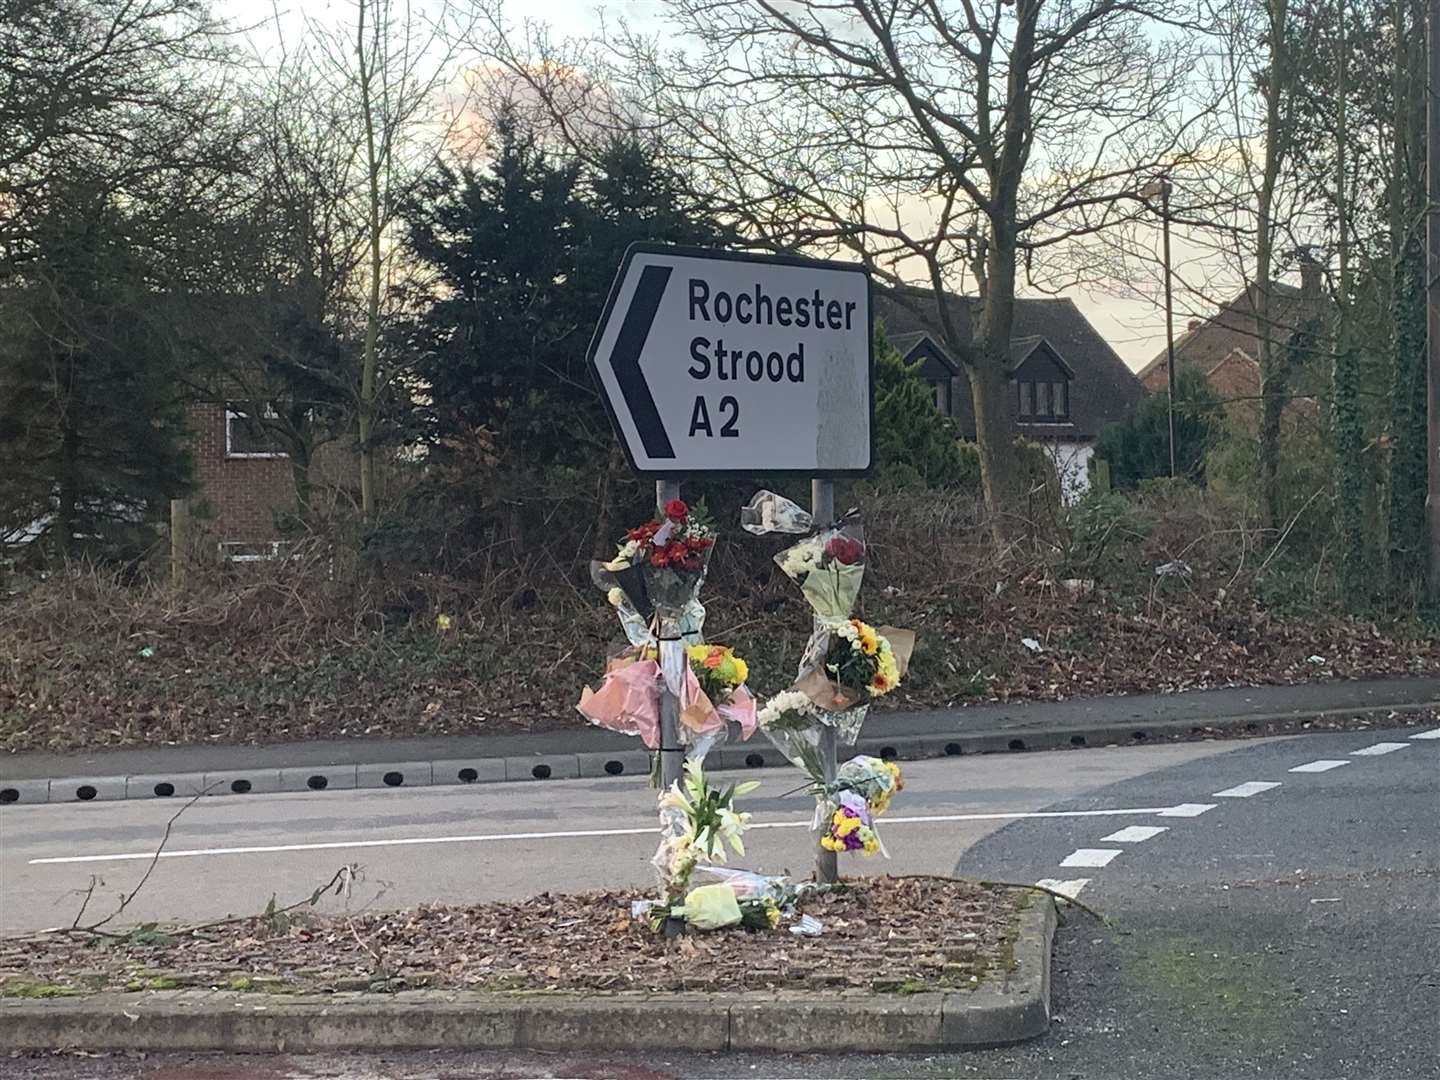 Flowers were attached to a sign by the Three Crutches roundabout on the A2 near Strood